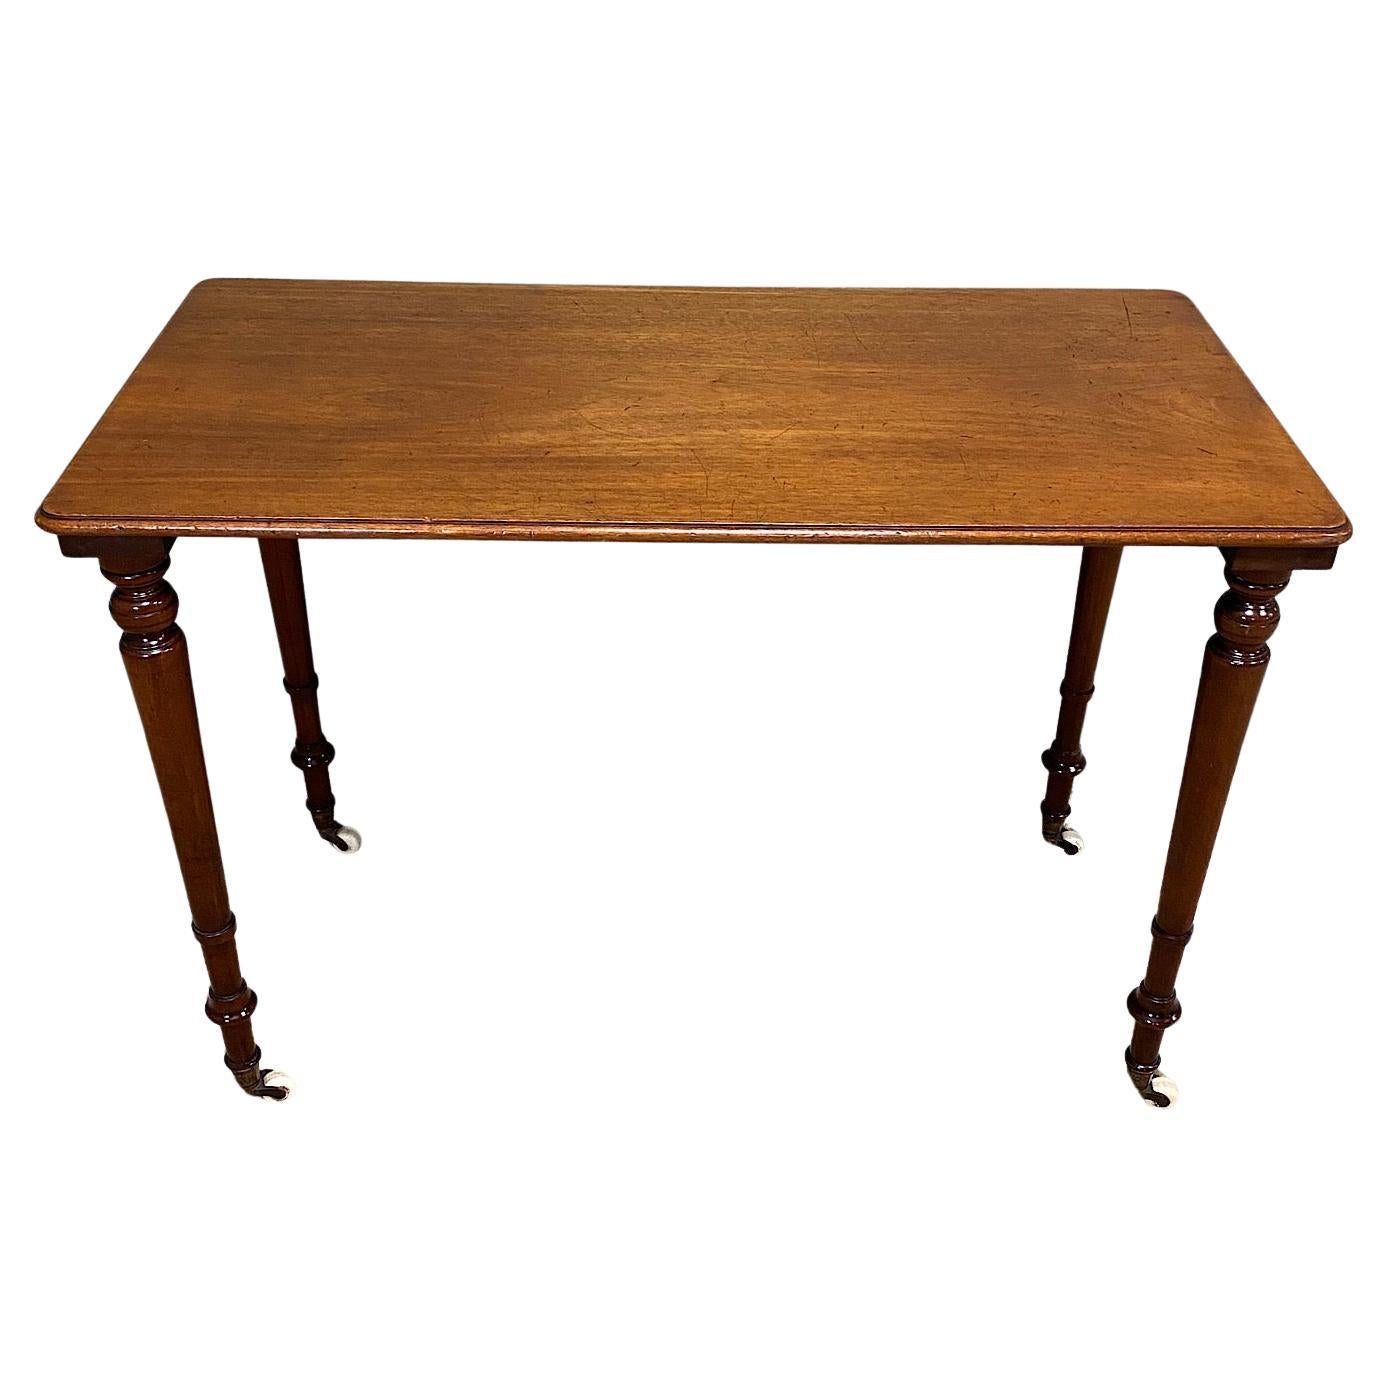 19th Century Elegant Victorian Mahogany Antique Side Stretcher Table For Sale